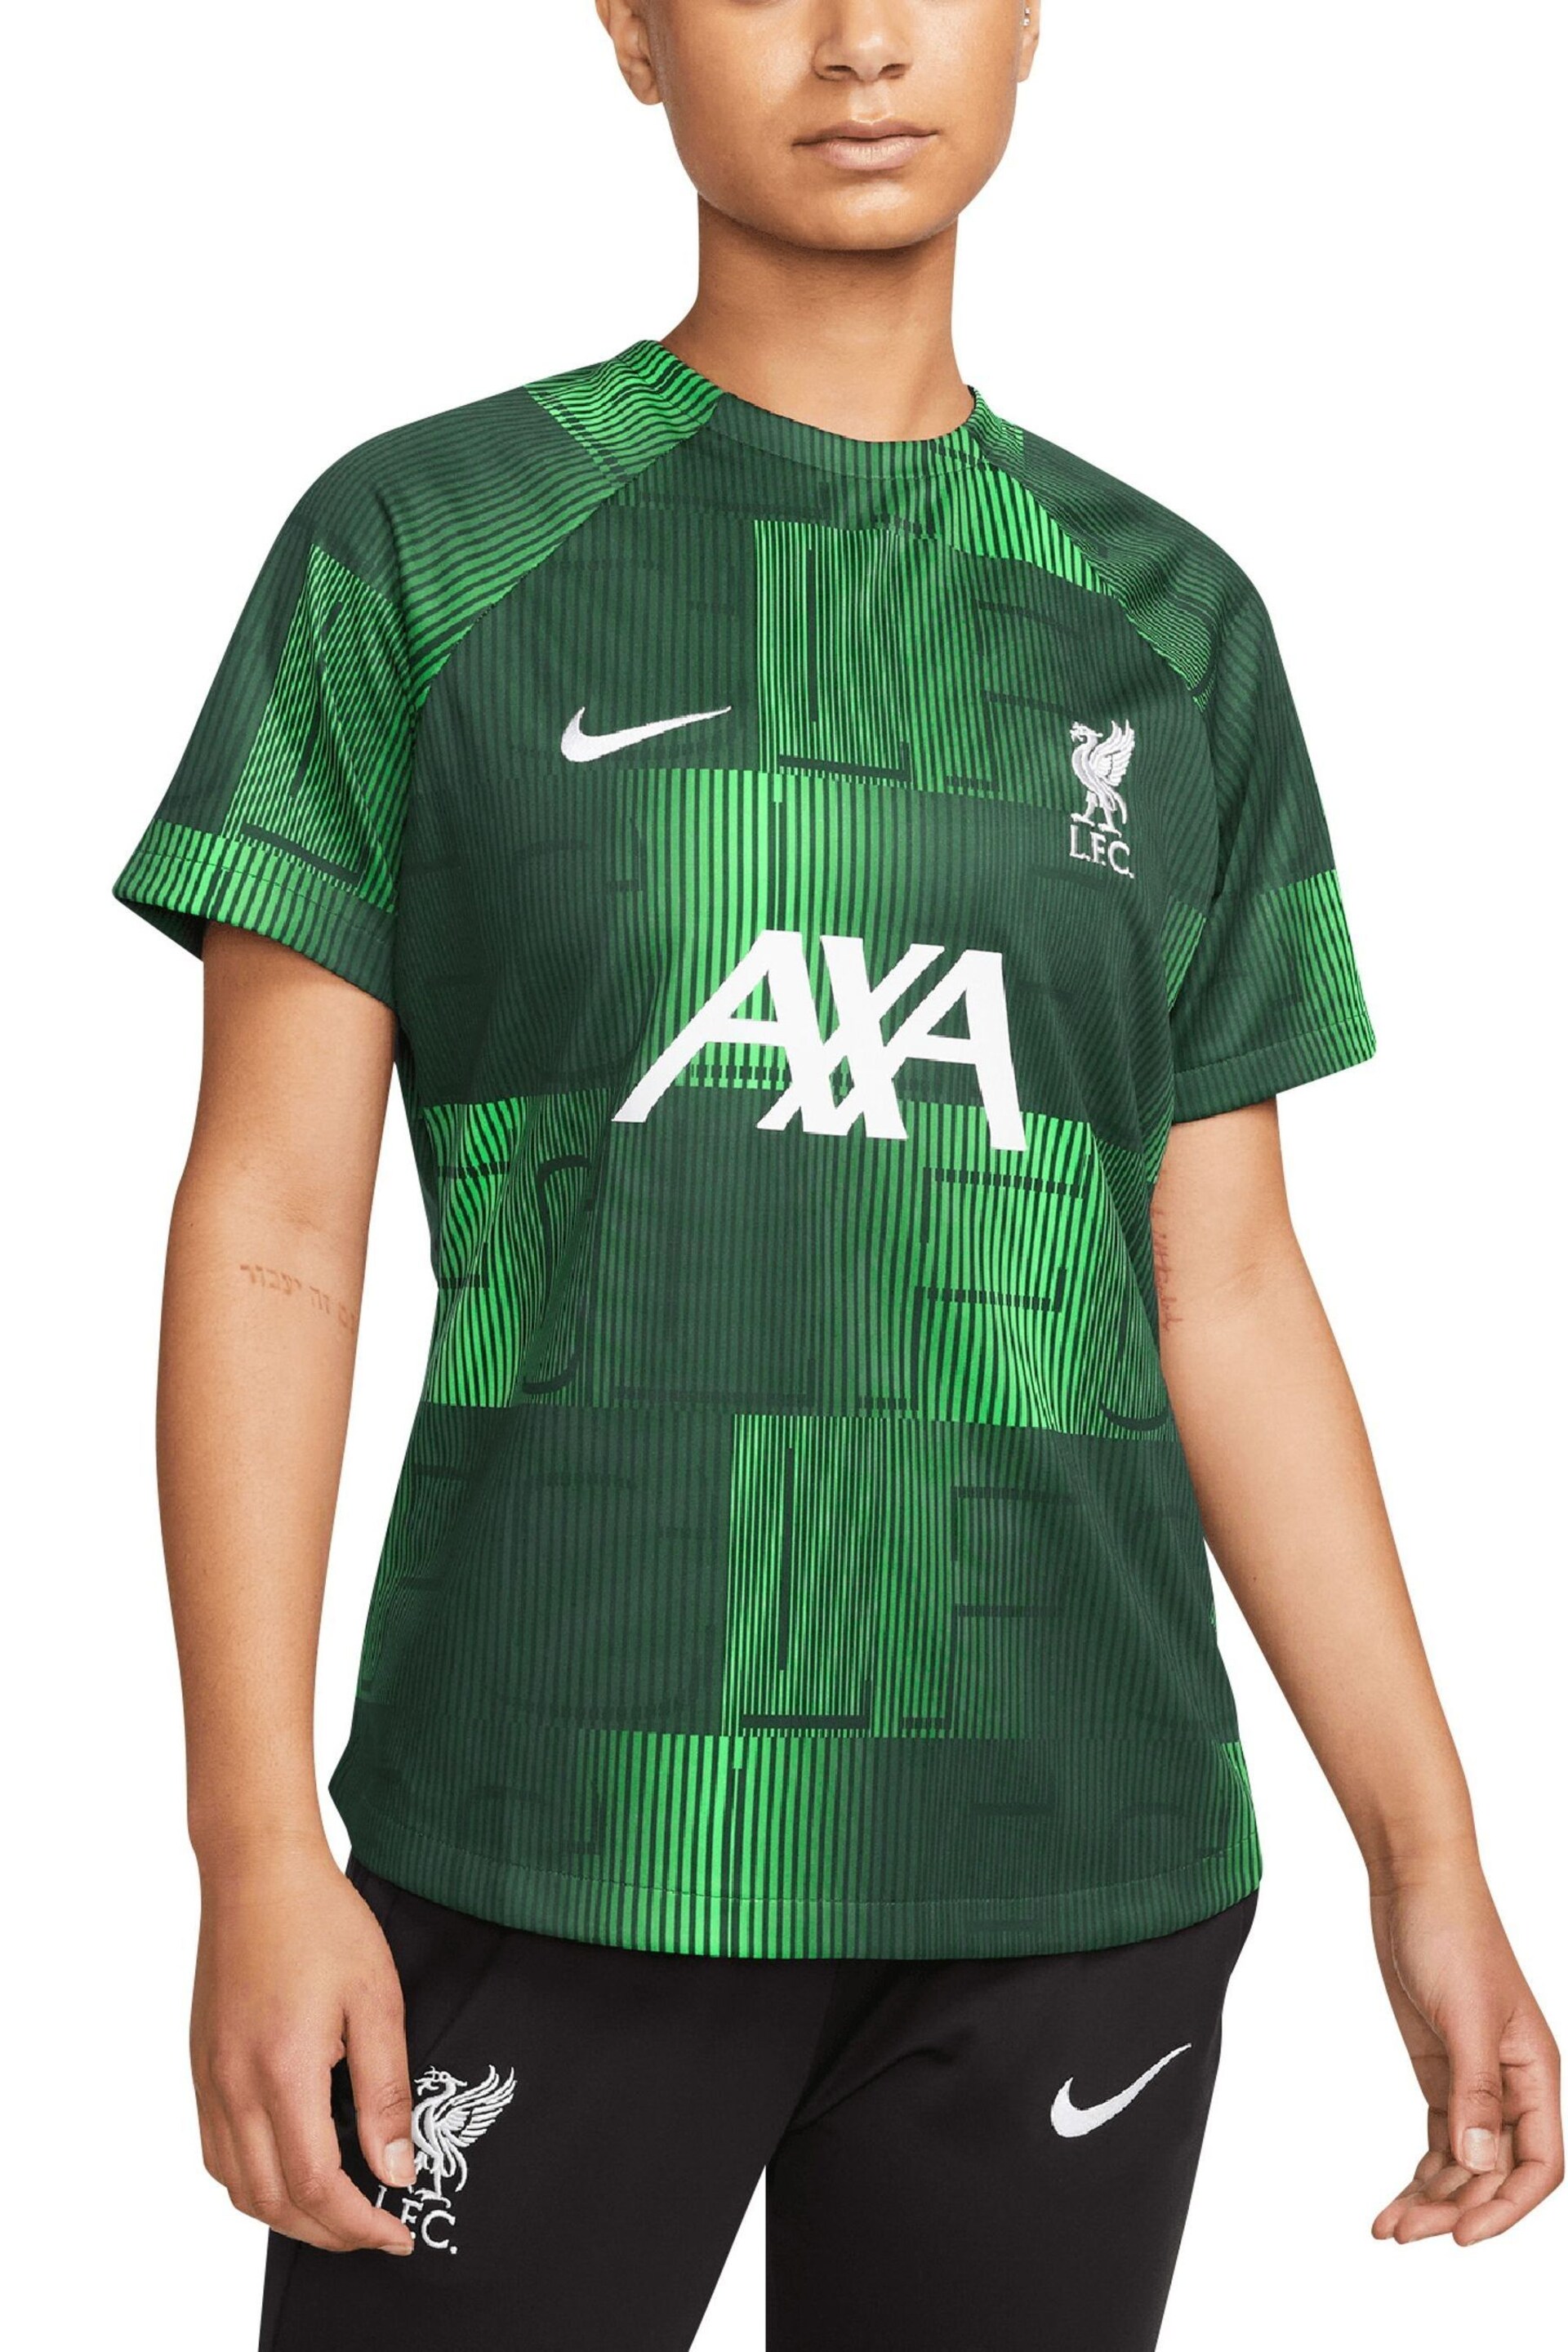 Nike Green Liverpool Academy Pro Pre Match Top Womens - Image 1 of 3